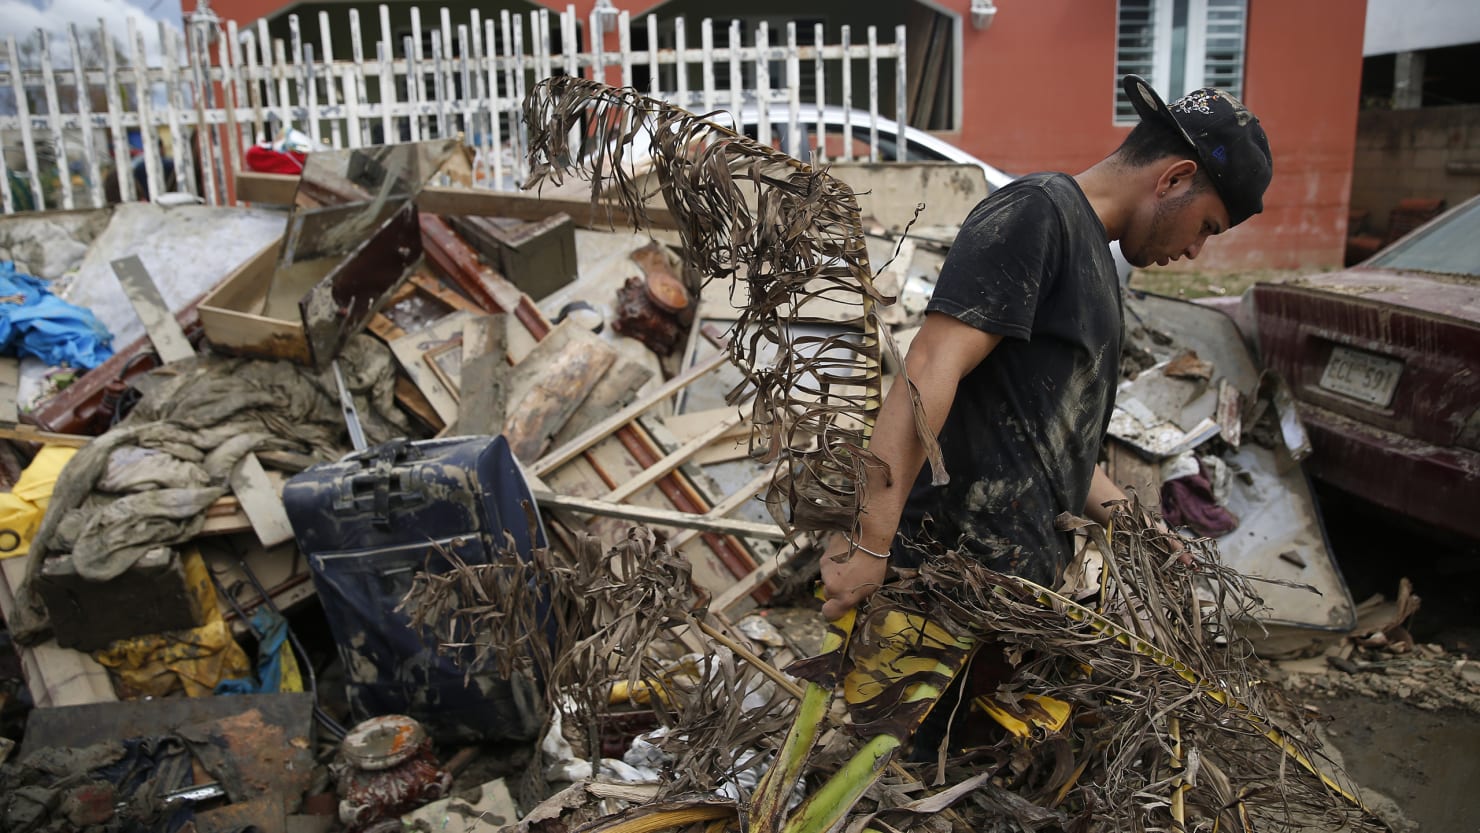 Seven Deaths in Puerto Rico Were Preventable, Government ... - 1480 x 833 jpeg 211kB